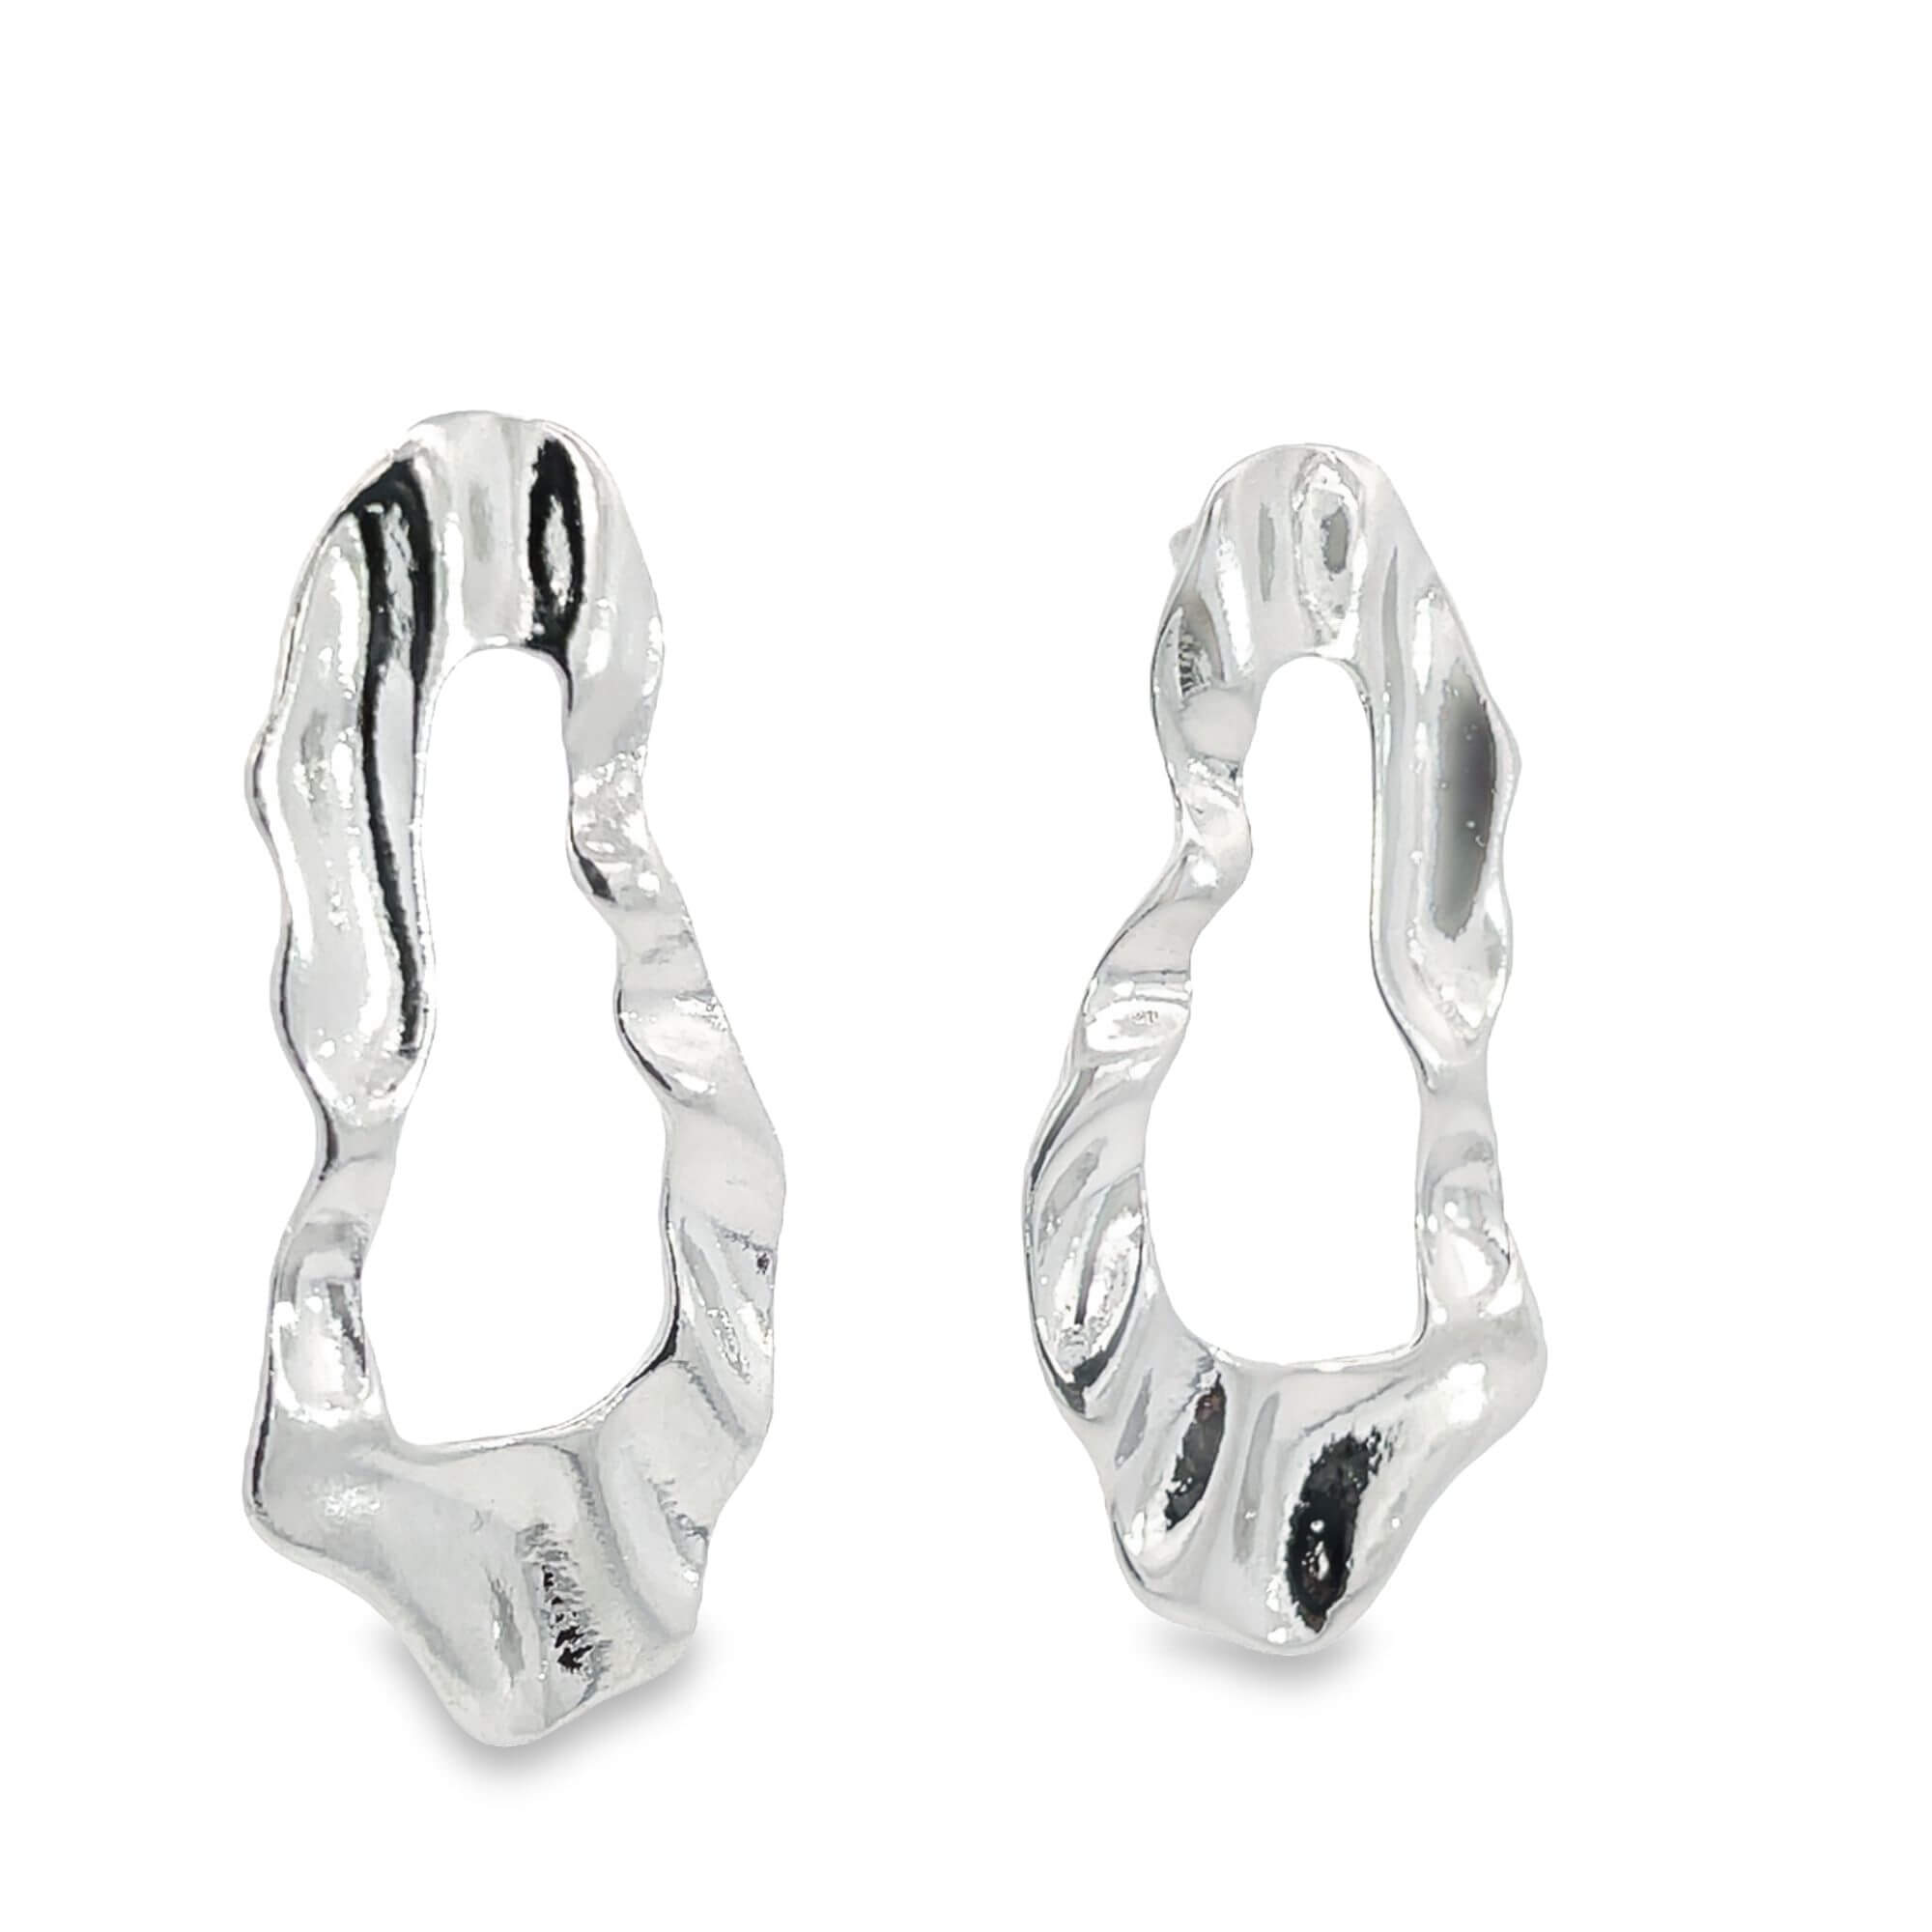 Abstract Oval Droopy Ruffled Style Stud Earrings (L488)